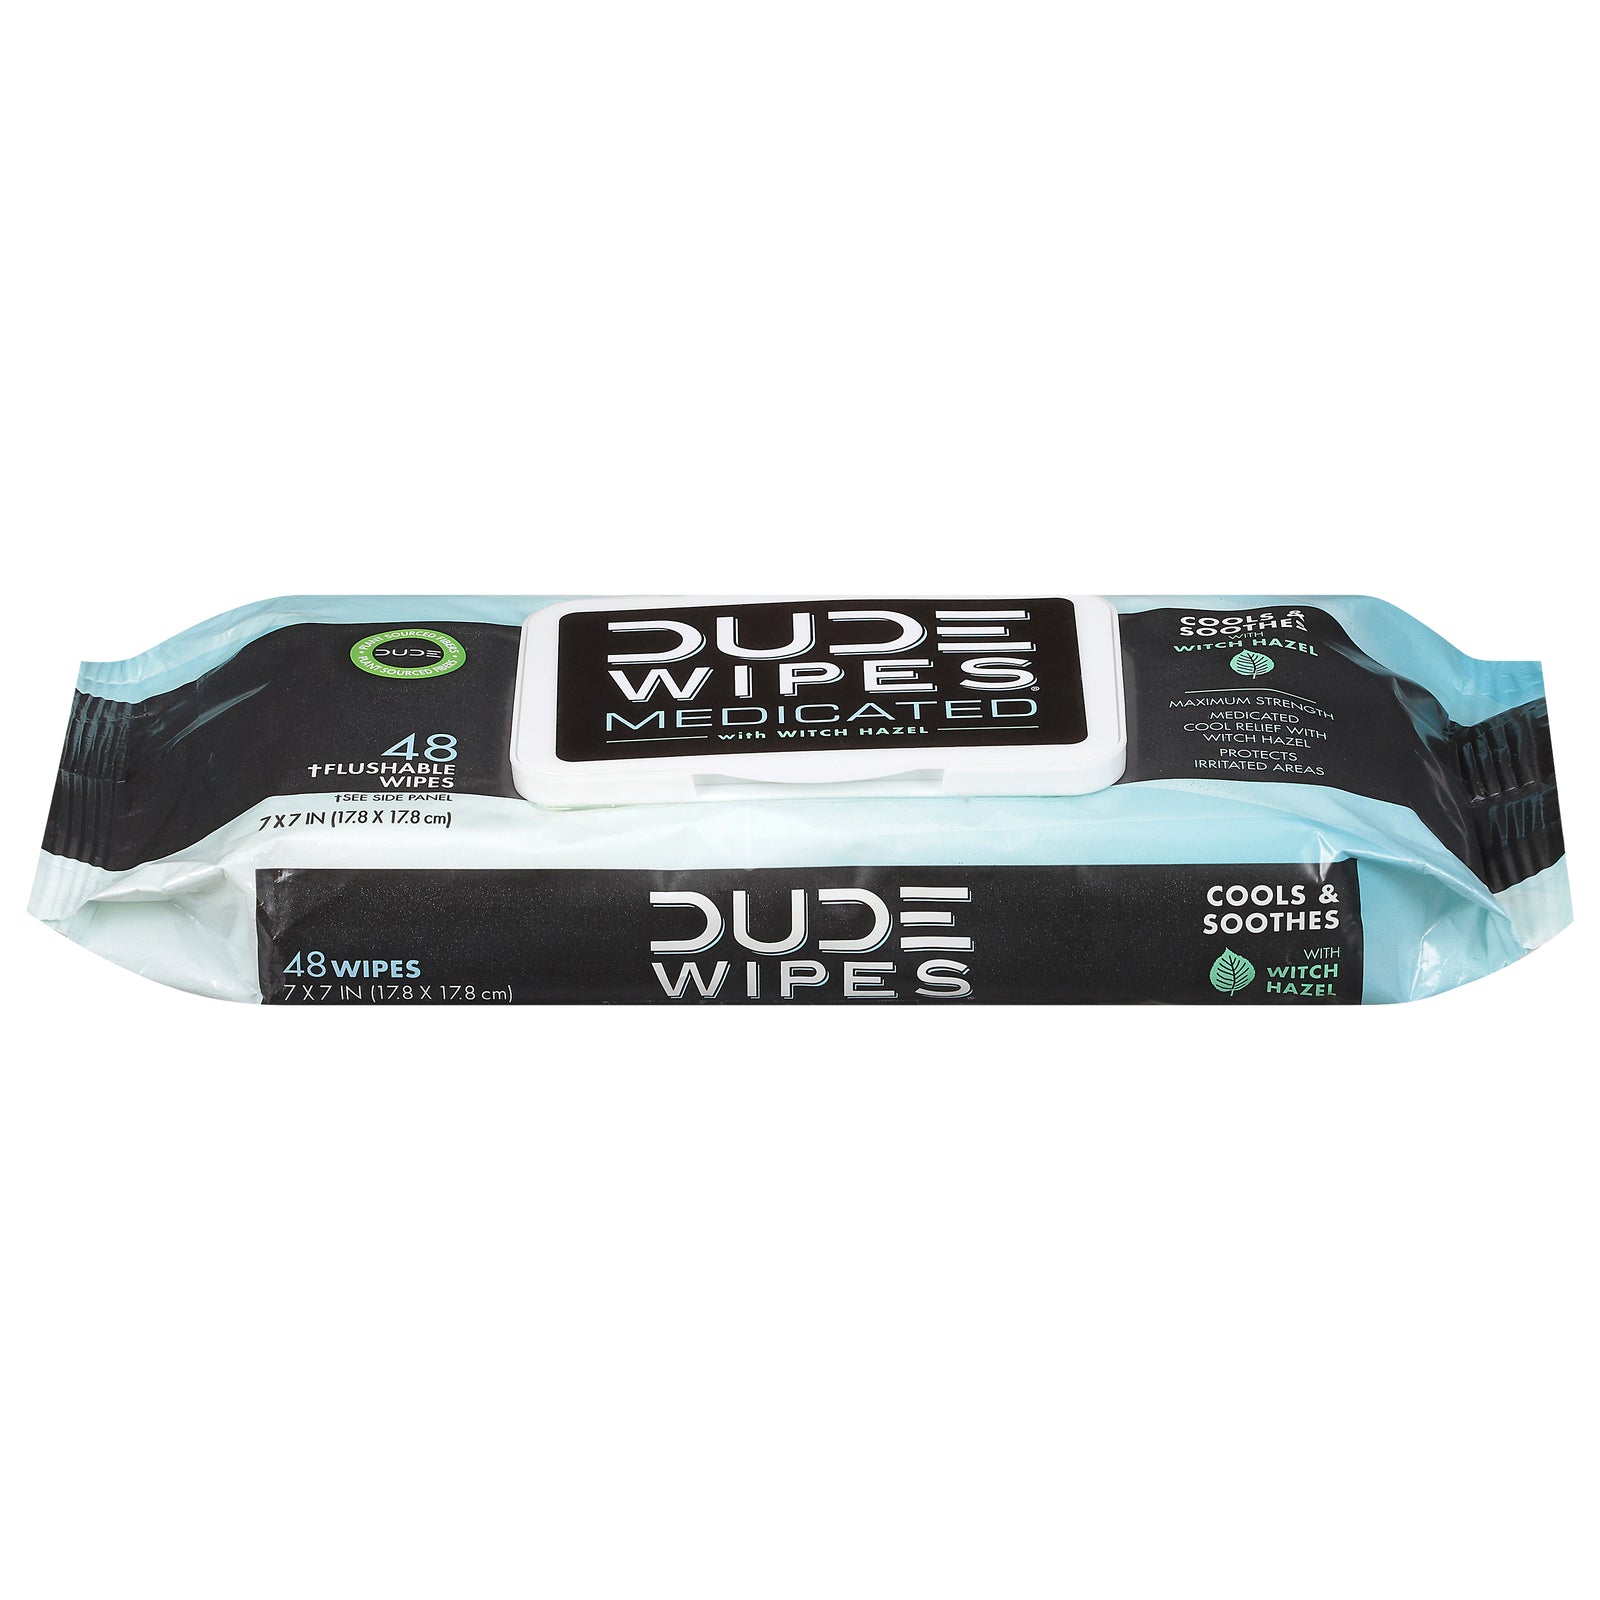 Dude Wipes - Wipes Medicated Wtch Hazl - 1 Each-48 CT